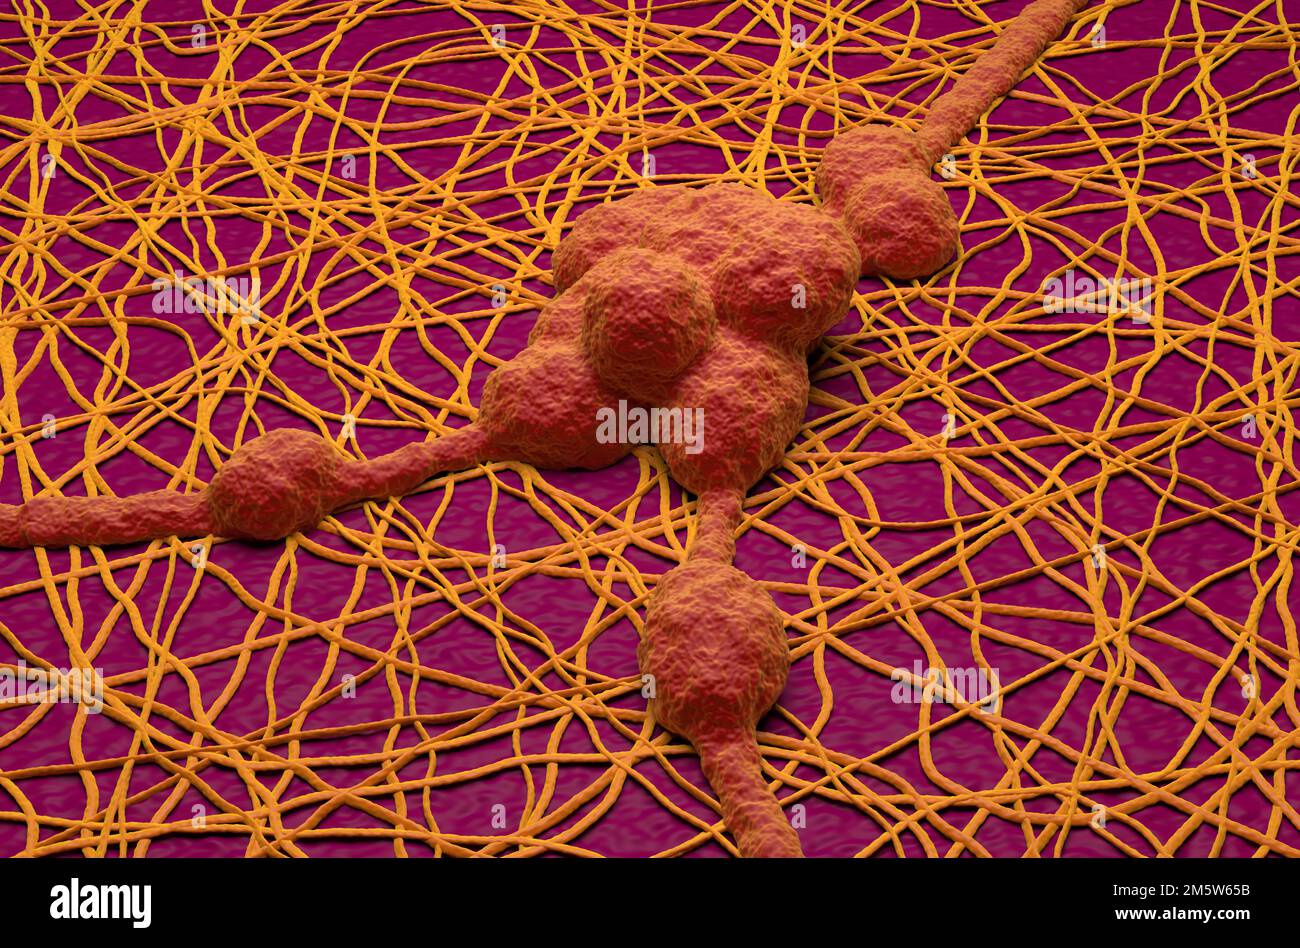 Neuron cells in the human nervous system - 3d illustration isometric view Stock Photo